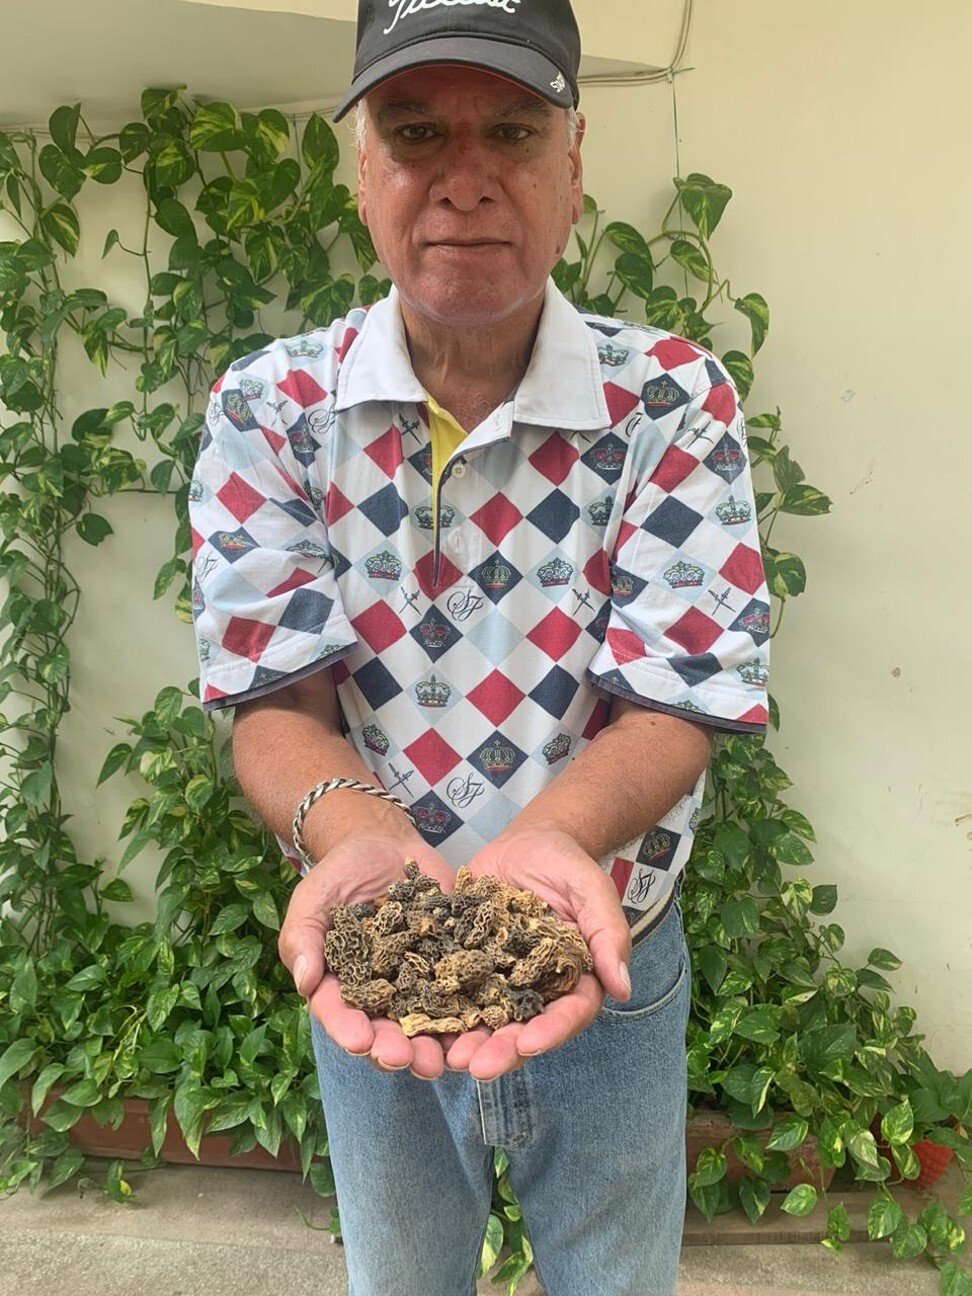 Rakesh Handa shows the morels he found in the forests near his apple orchards in Himachal Pradesh in India. Photo: Rakesh Handa